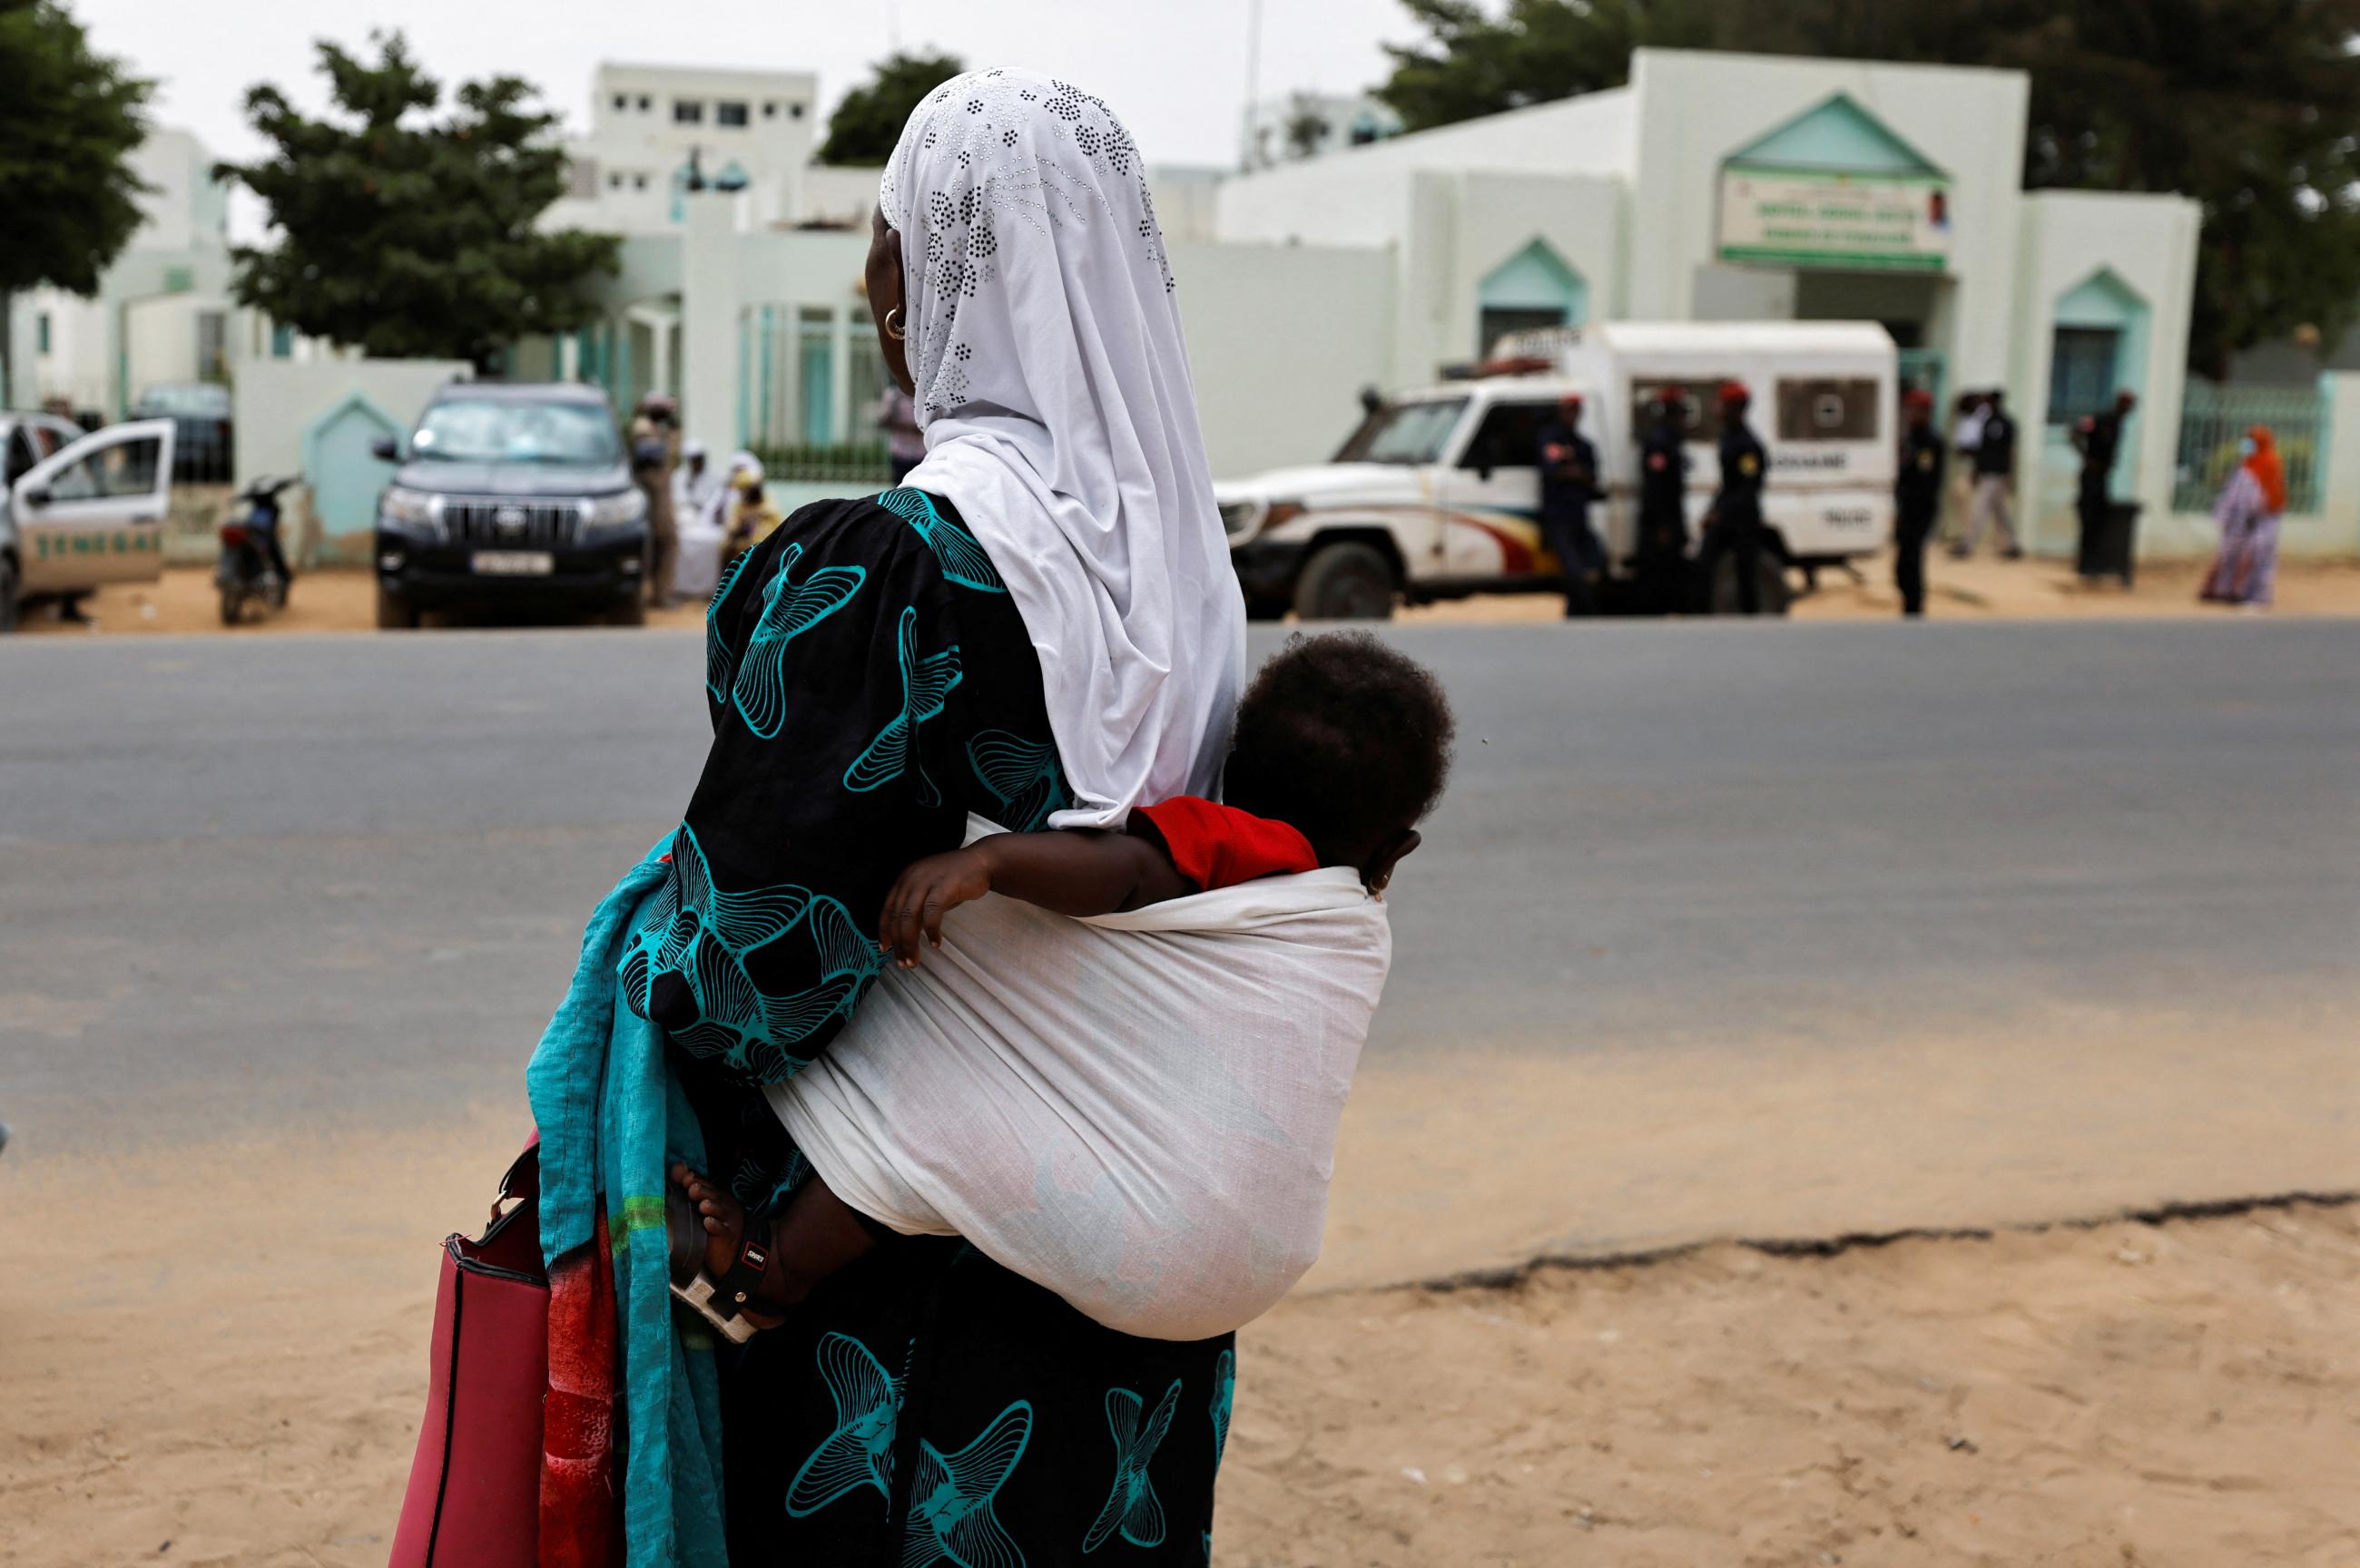 A woman carries her child as she stands in front of the hospital where new-born babies died in a fire at the neonatal section, in Tivaouane, Senegal May 26, 2022.